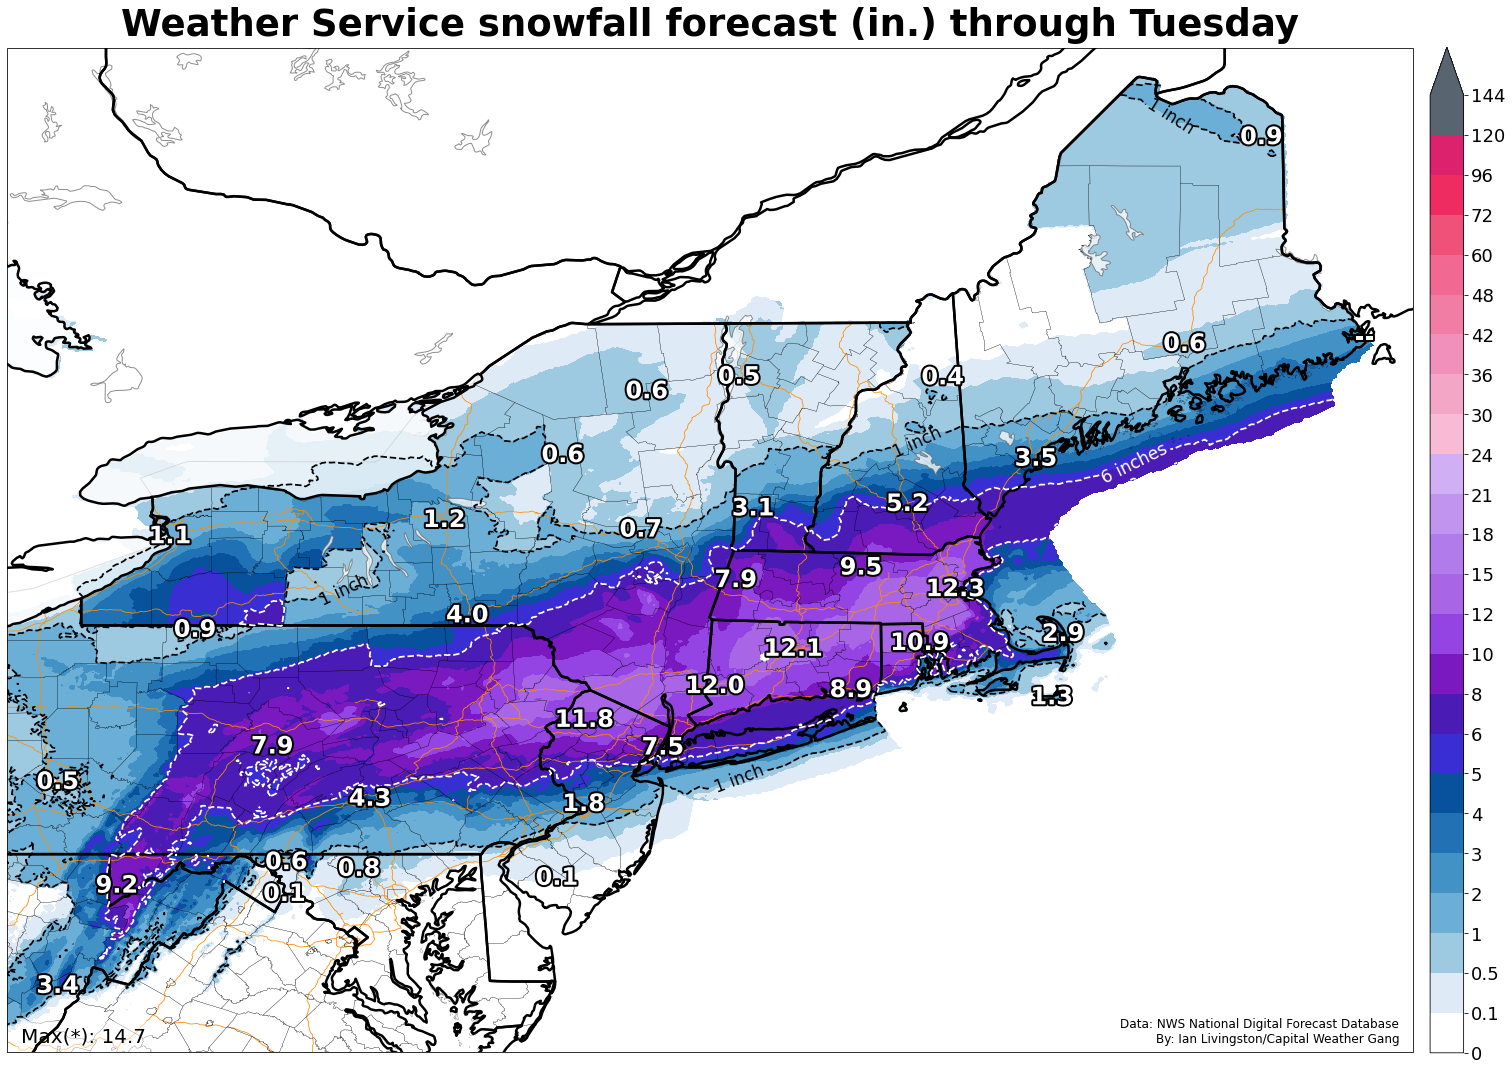 northeast braces for heavy snowstorm and dangerous travel tuesday